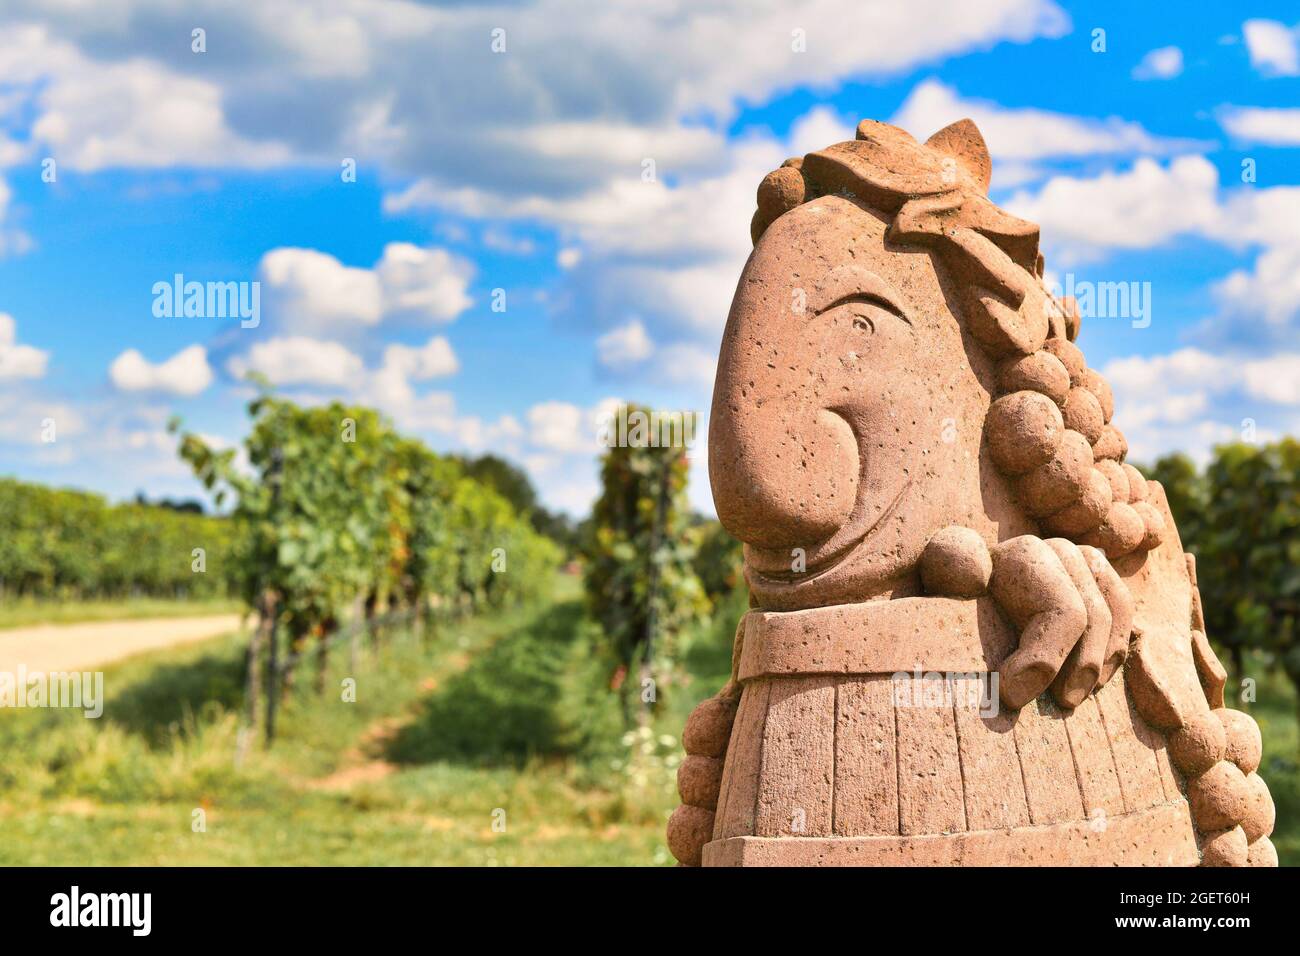 Wiesloch, Germany - August 2021: Funny sculpture of wine god called 'Speedy Bacchus' with blurry vineyard in background Stock Photo